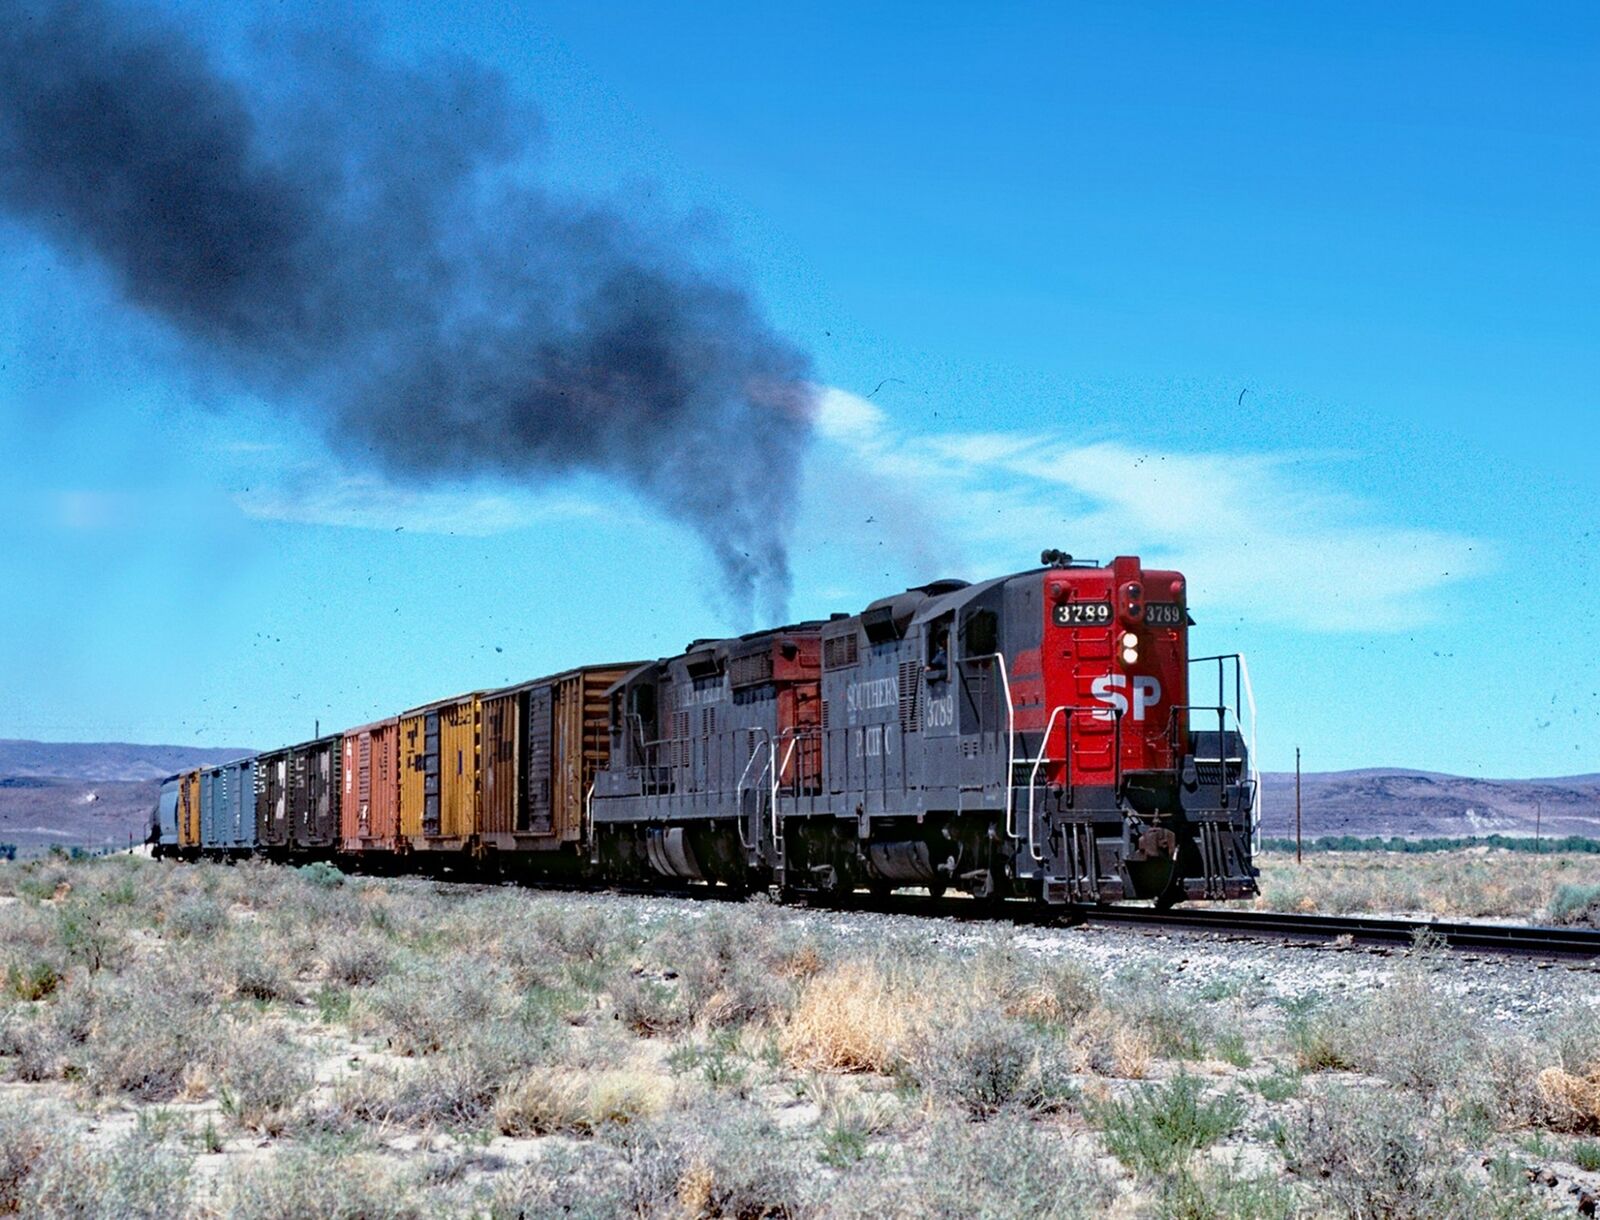 SOUTHERN PACIFIC TRAIN Leaving Silver Springs NV  8.5X11 PHOTO